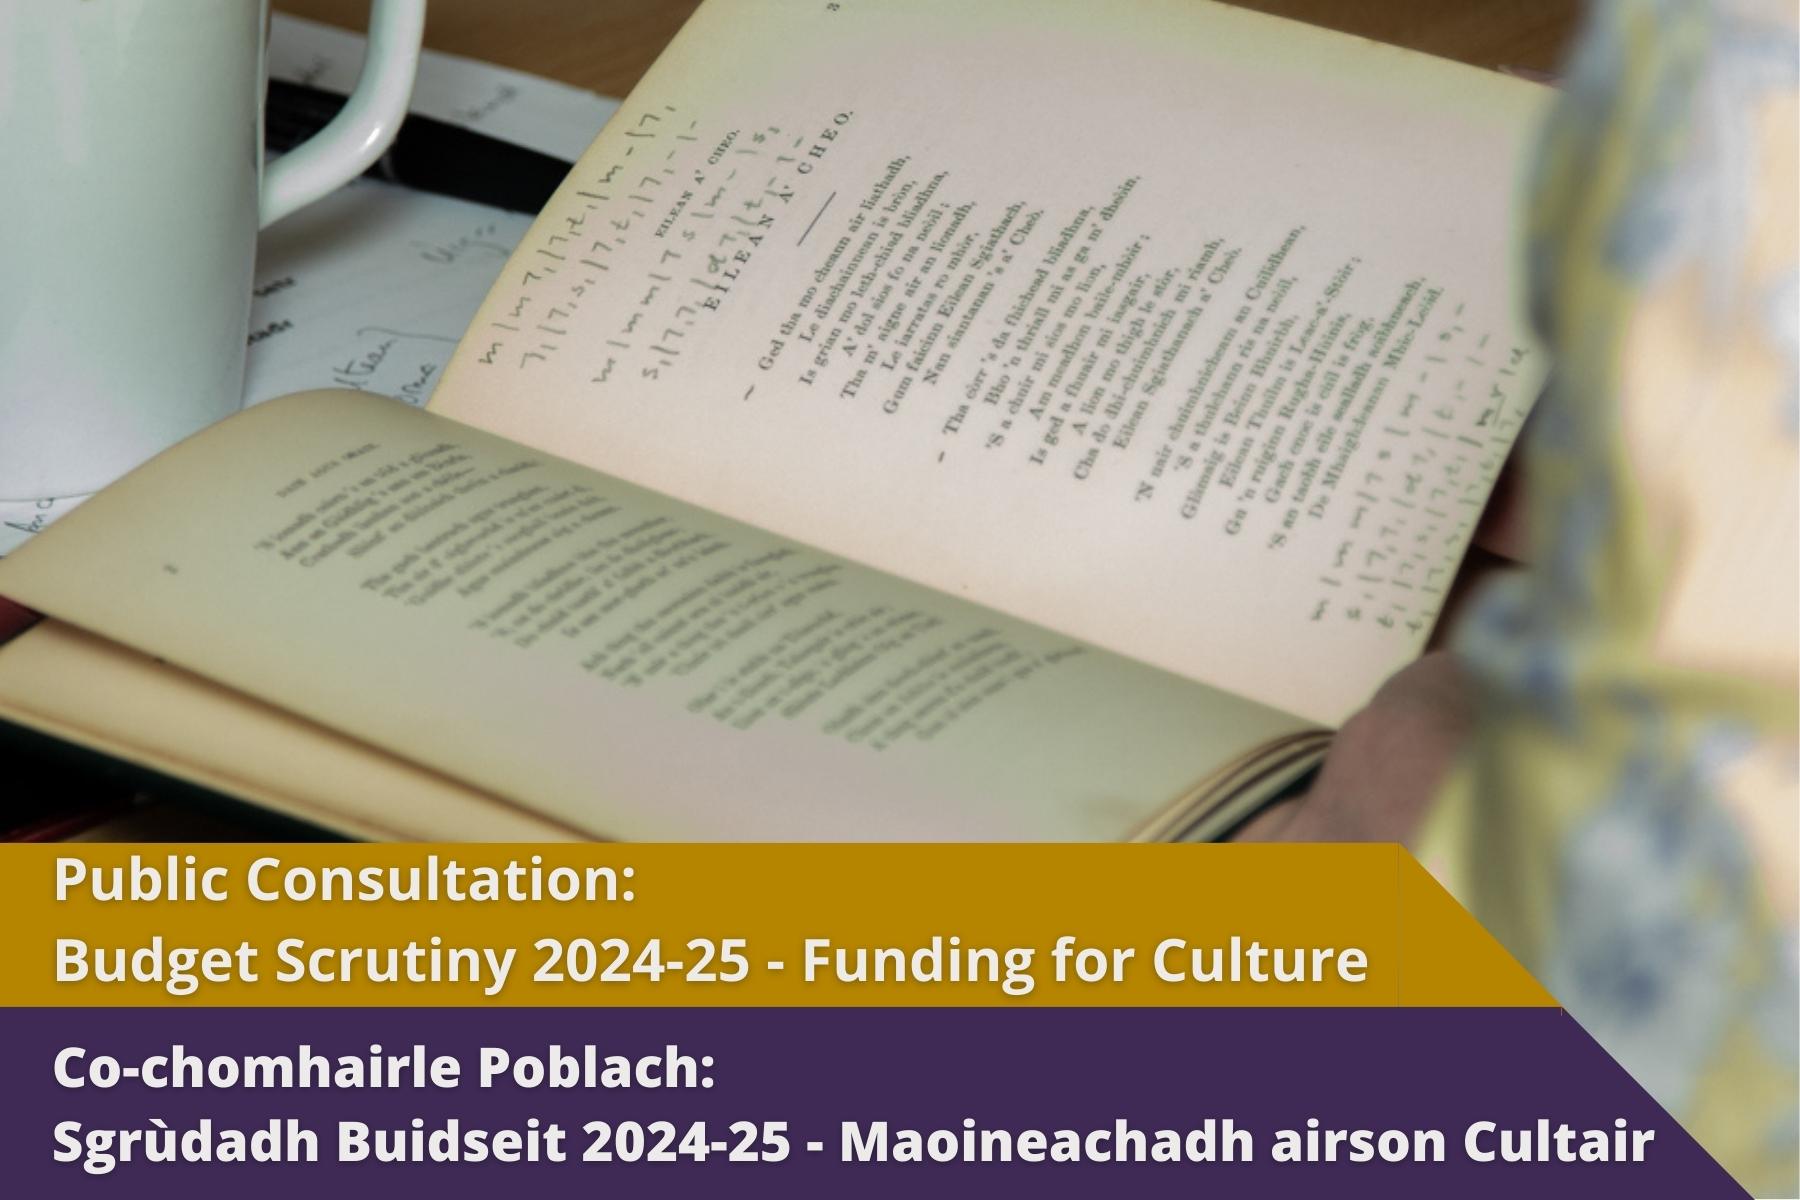 Picture: An open book containing both text and numbers. Text reads 'Public Consultation: Budget Scrutiny 2024-25: Funding for Culture